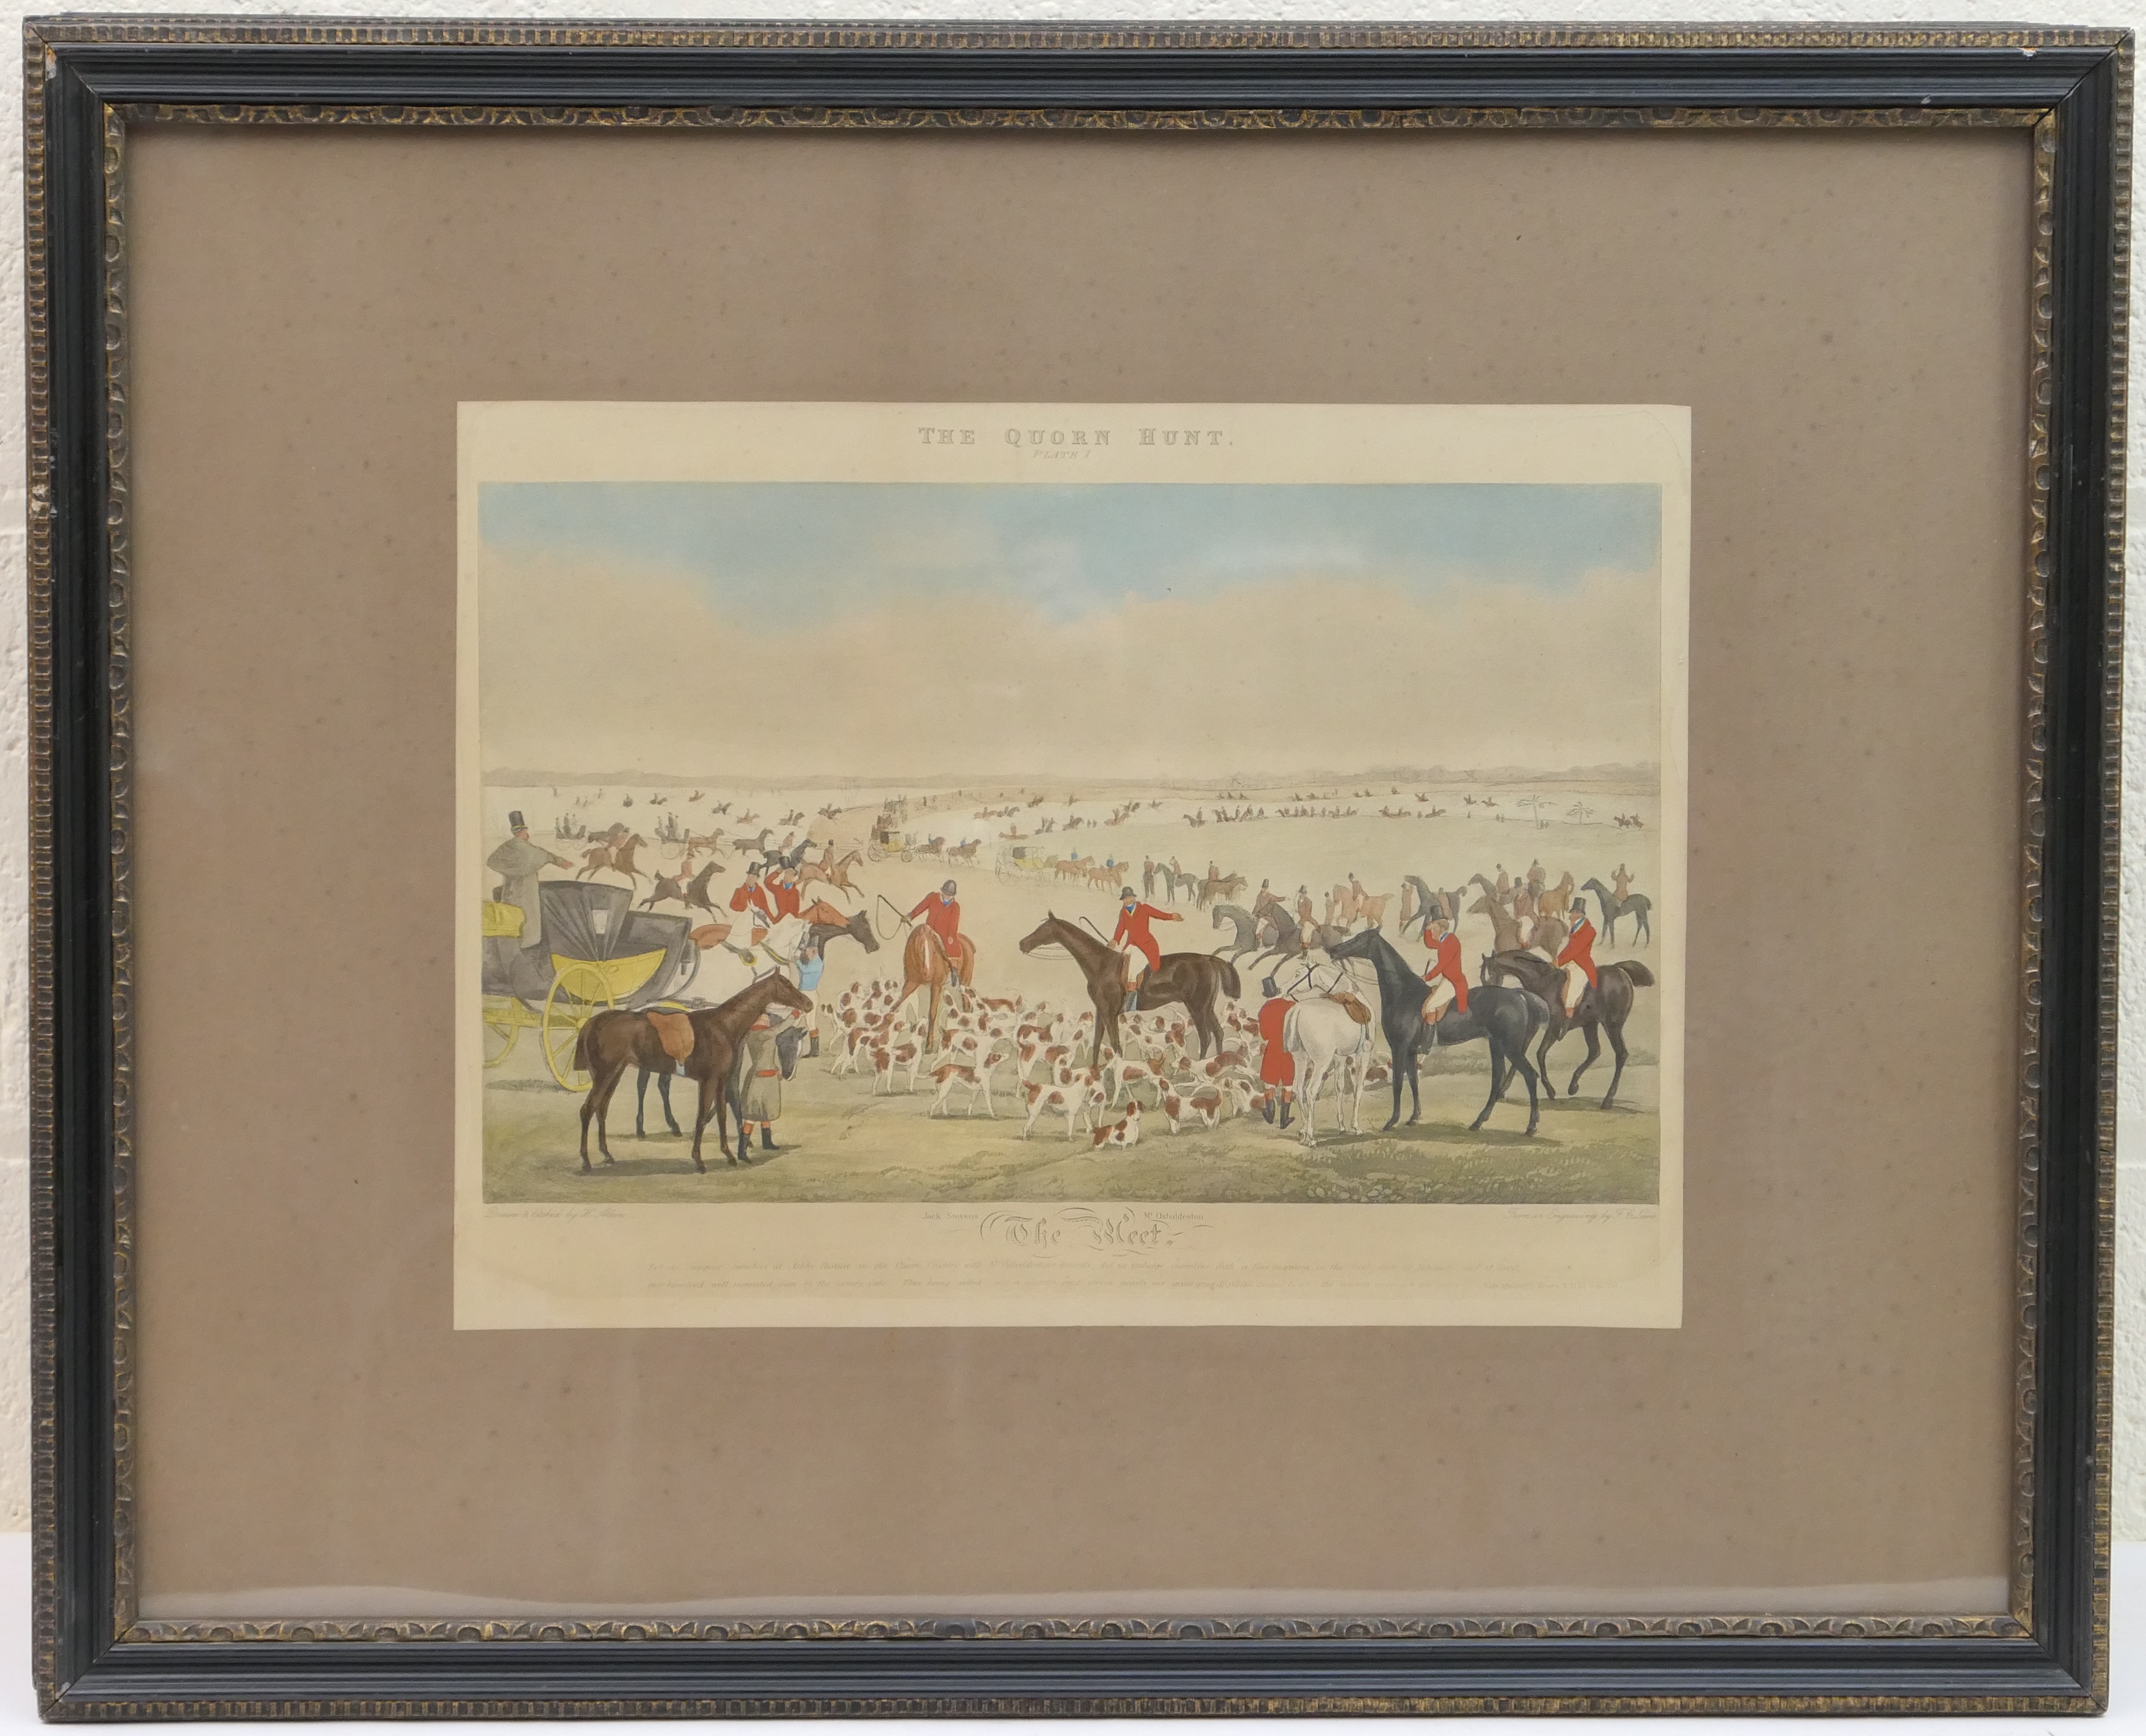 Six Henry Alken hand coloured engravings, The Quorn Hunt, 30cm x 40cm - Image 5 of 6